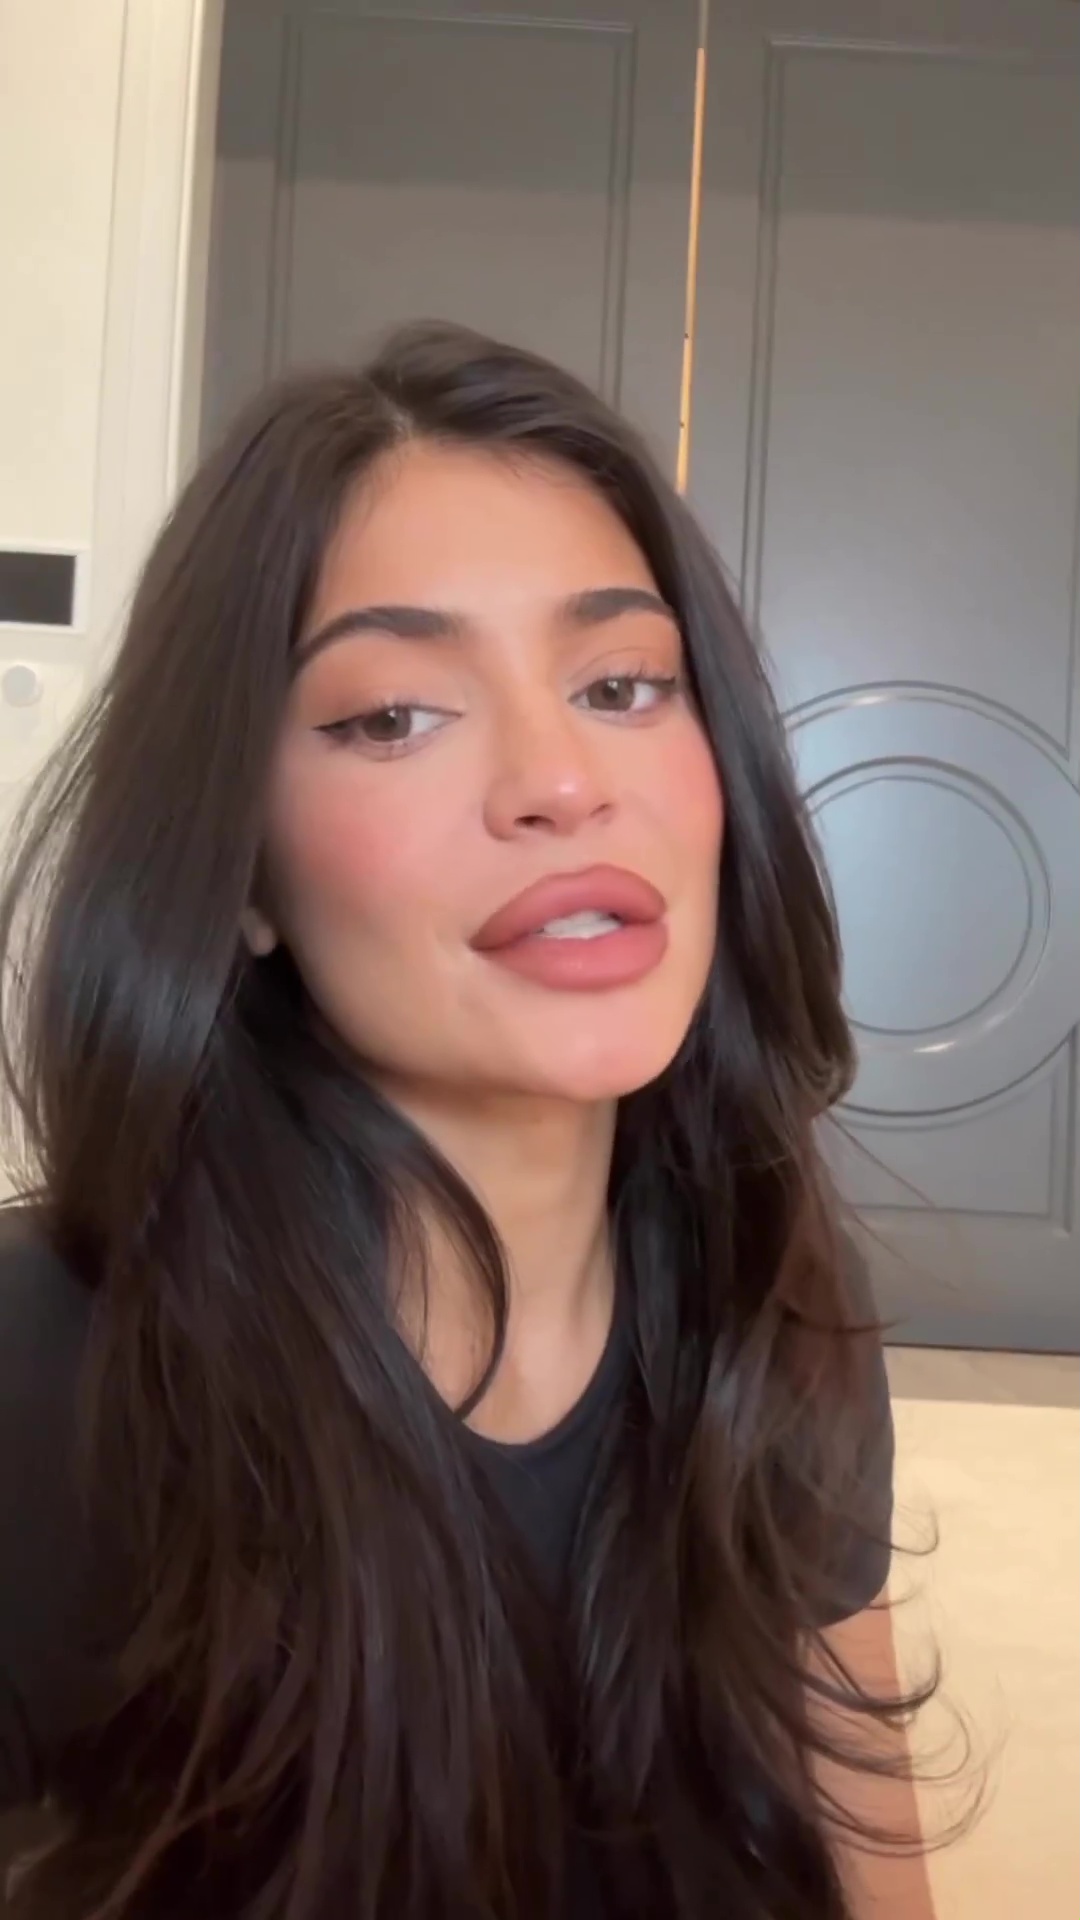 Kylie Jenner critics mock star’s new selfie that ‘looks like a mugshot’ and accuse her of ‘going overboard’ with Botox